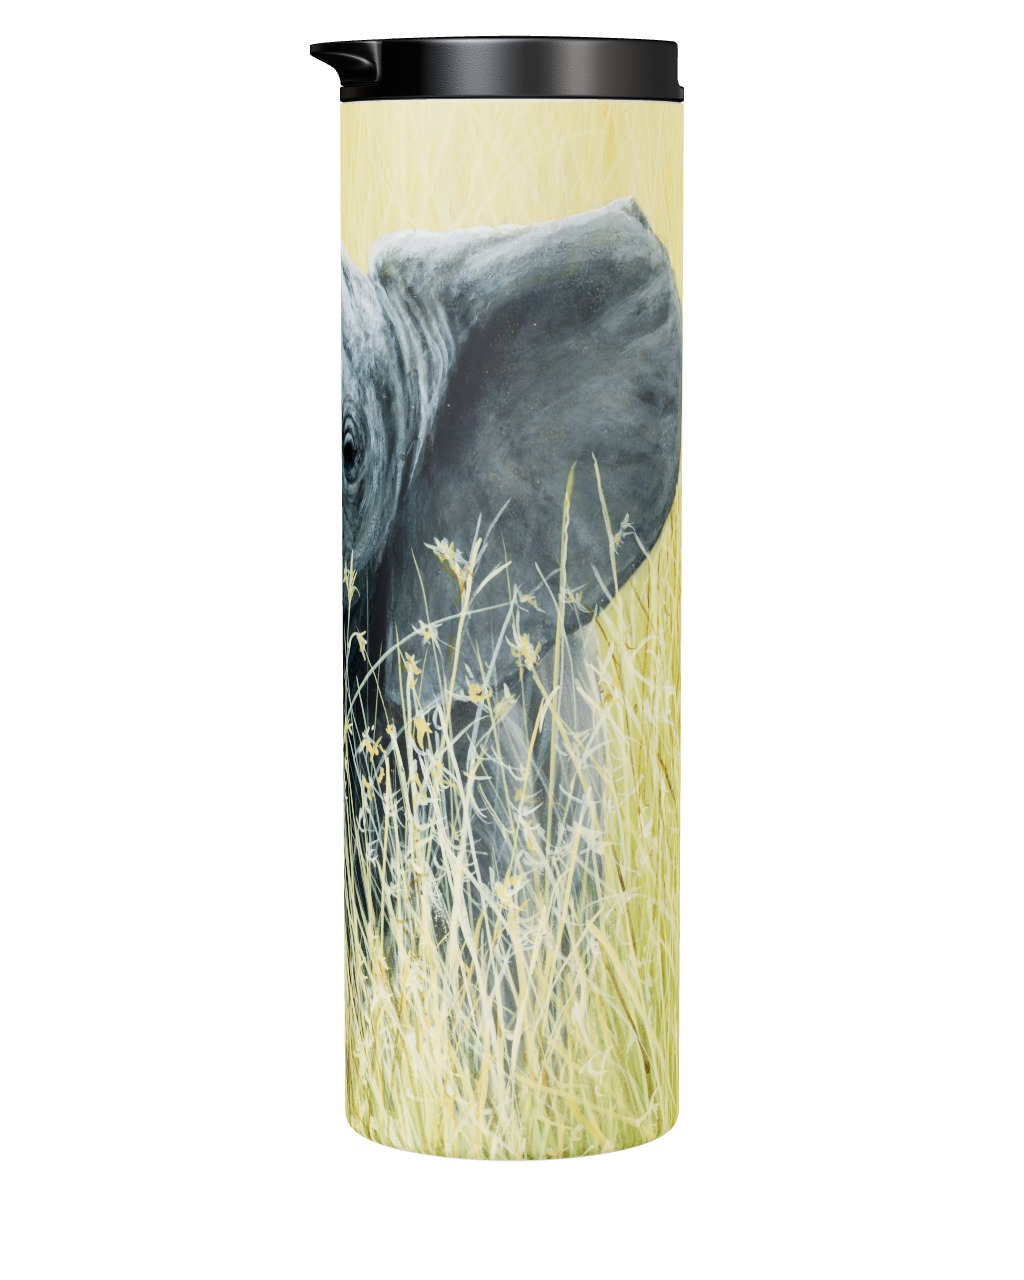 Elephant In The Grass - Tumbler